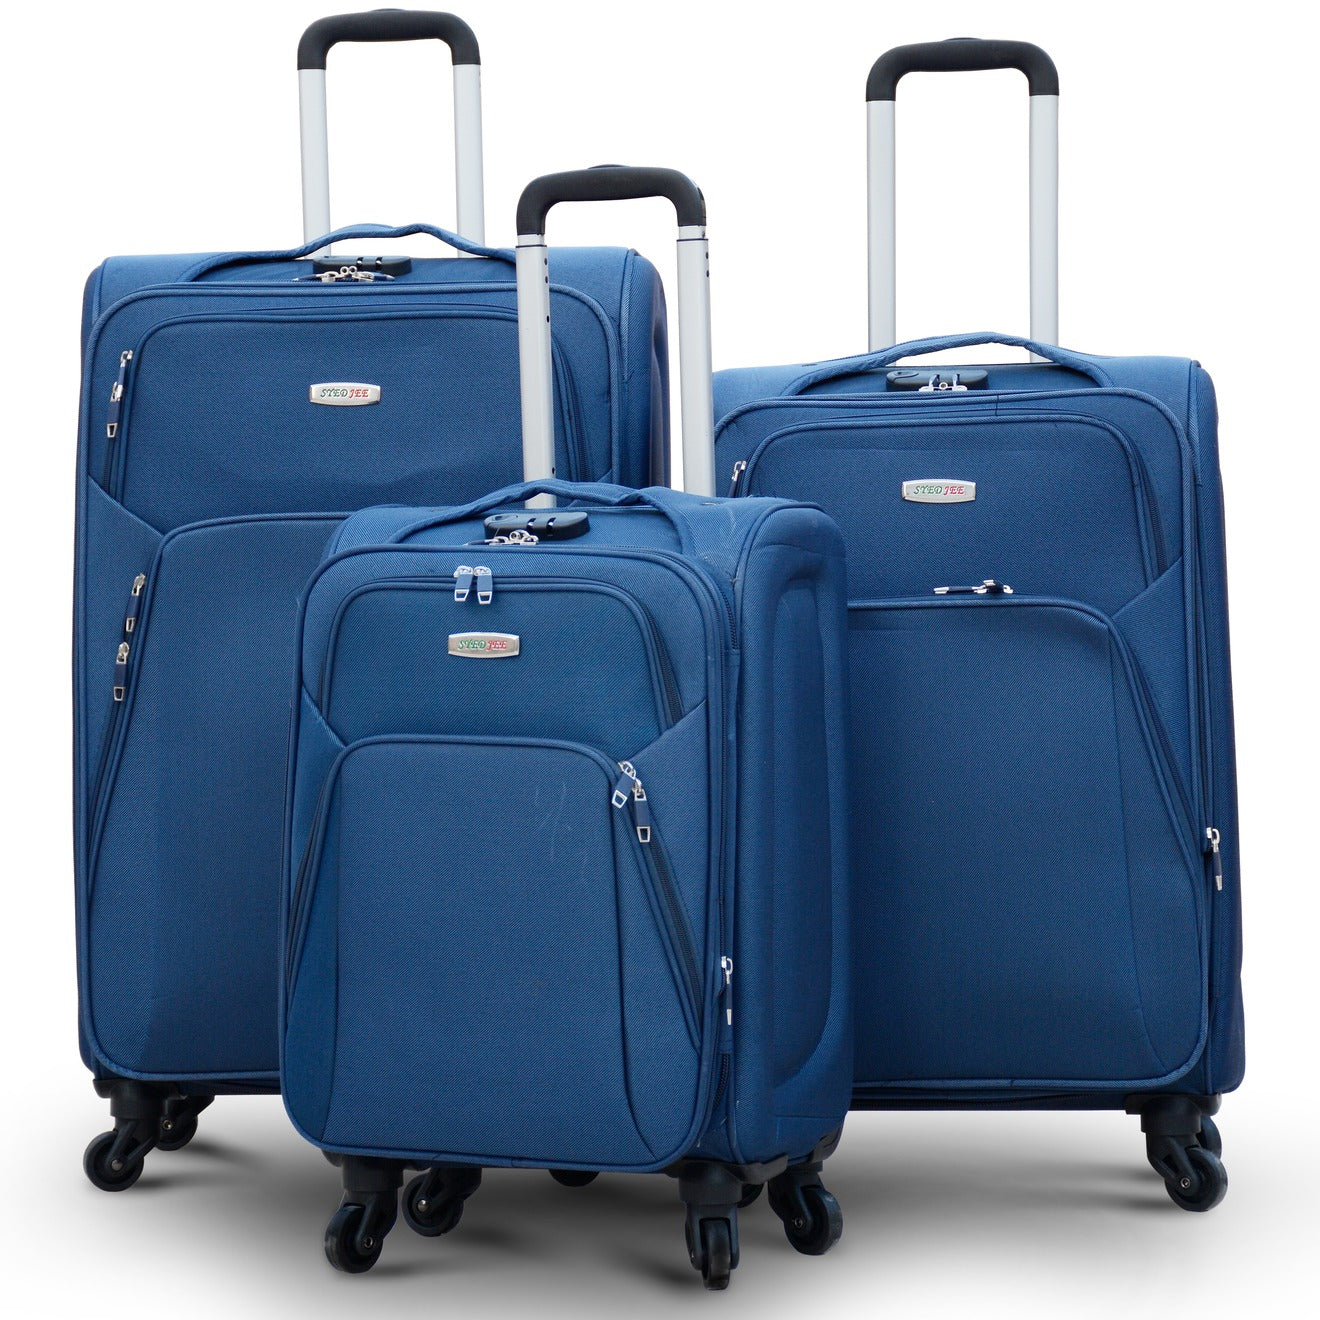 4 Pcs Full Set 20” 24” 28" 32 Inches Blue 4 Wheels Soft Material Luggage Lightweight Soft Shell